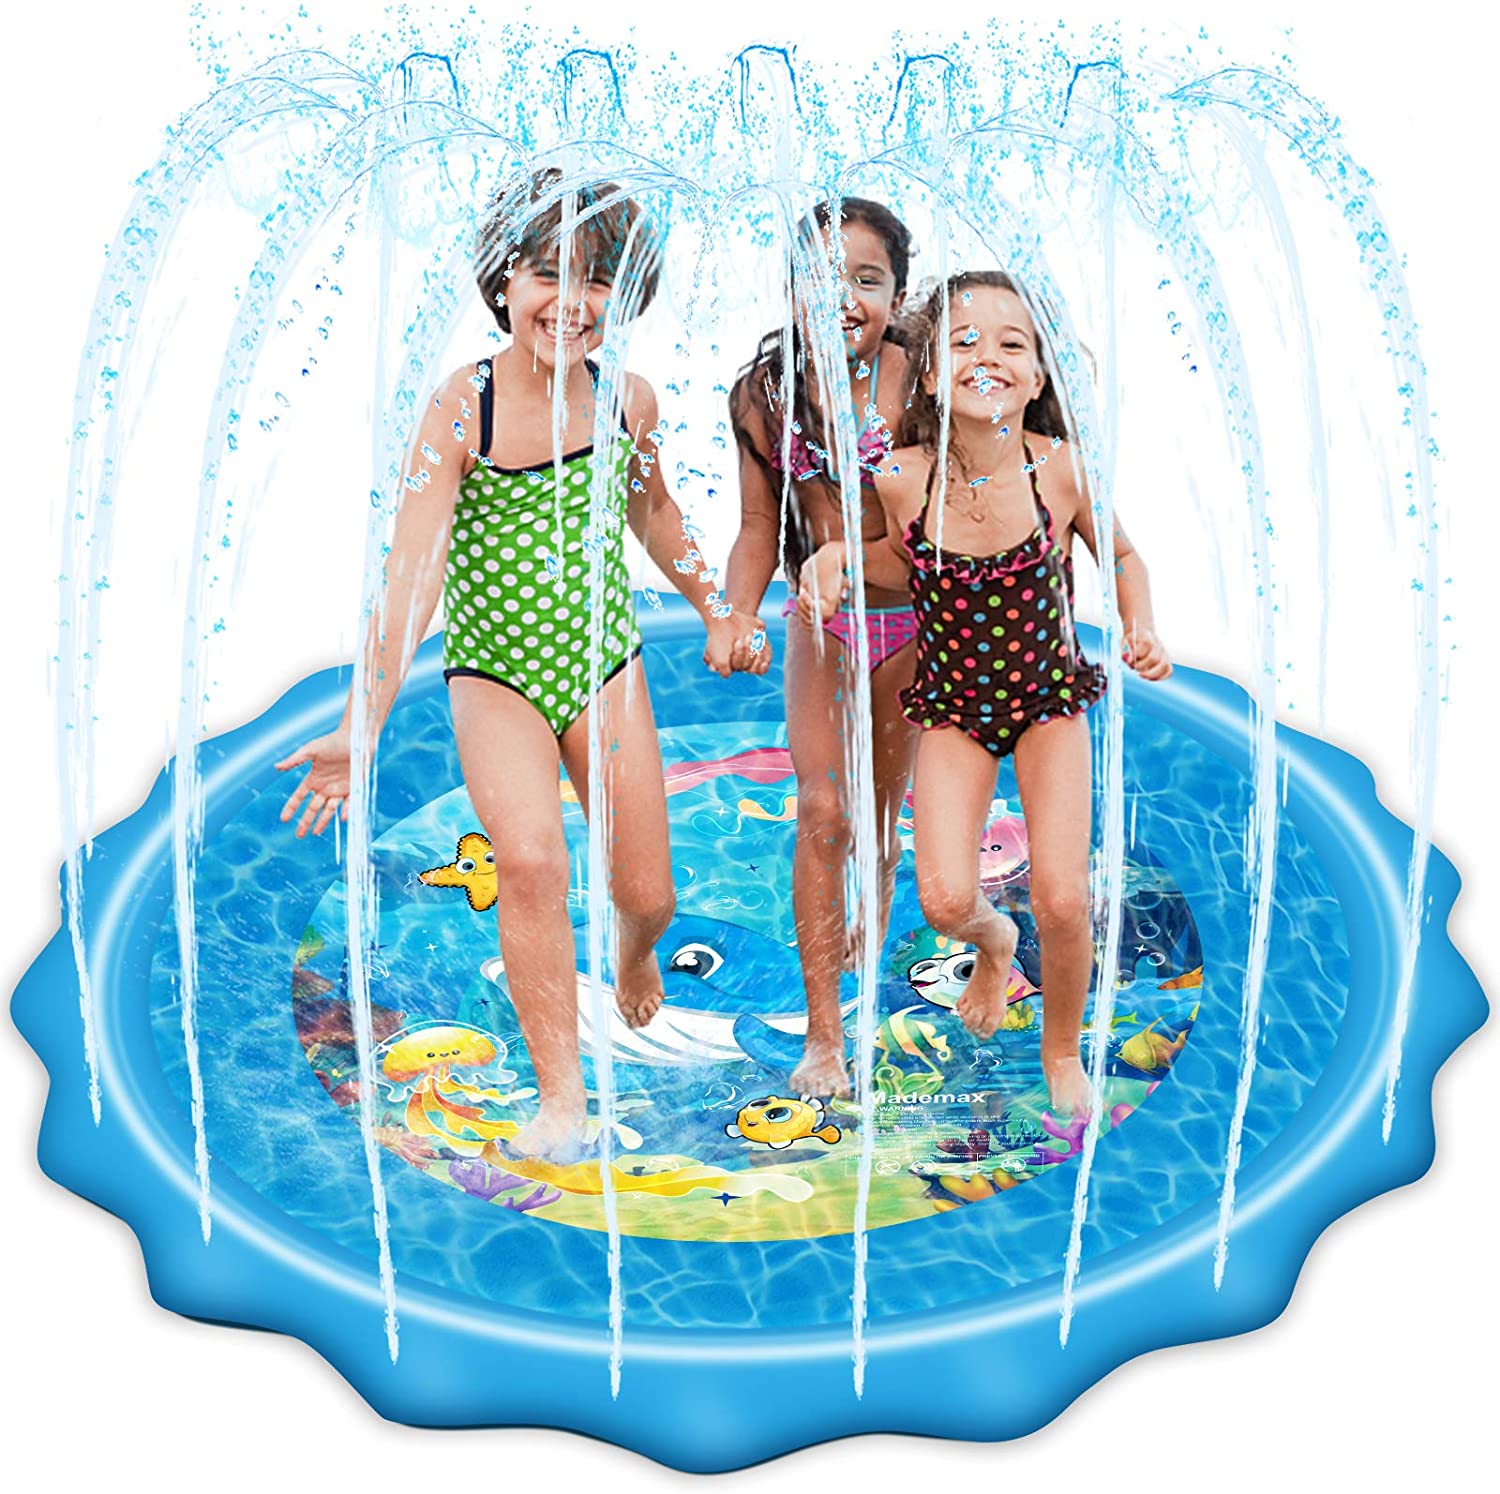 🏊(Summer Hot Sale - 50% OFF) KIDS WATERMAT - BUY 2 FREE SHIPPING